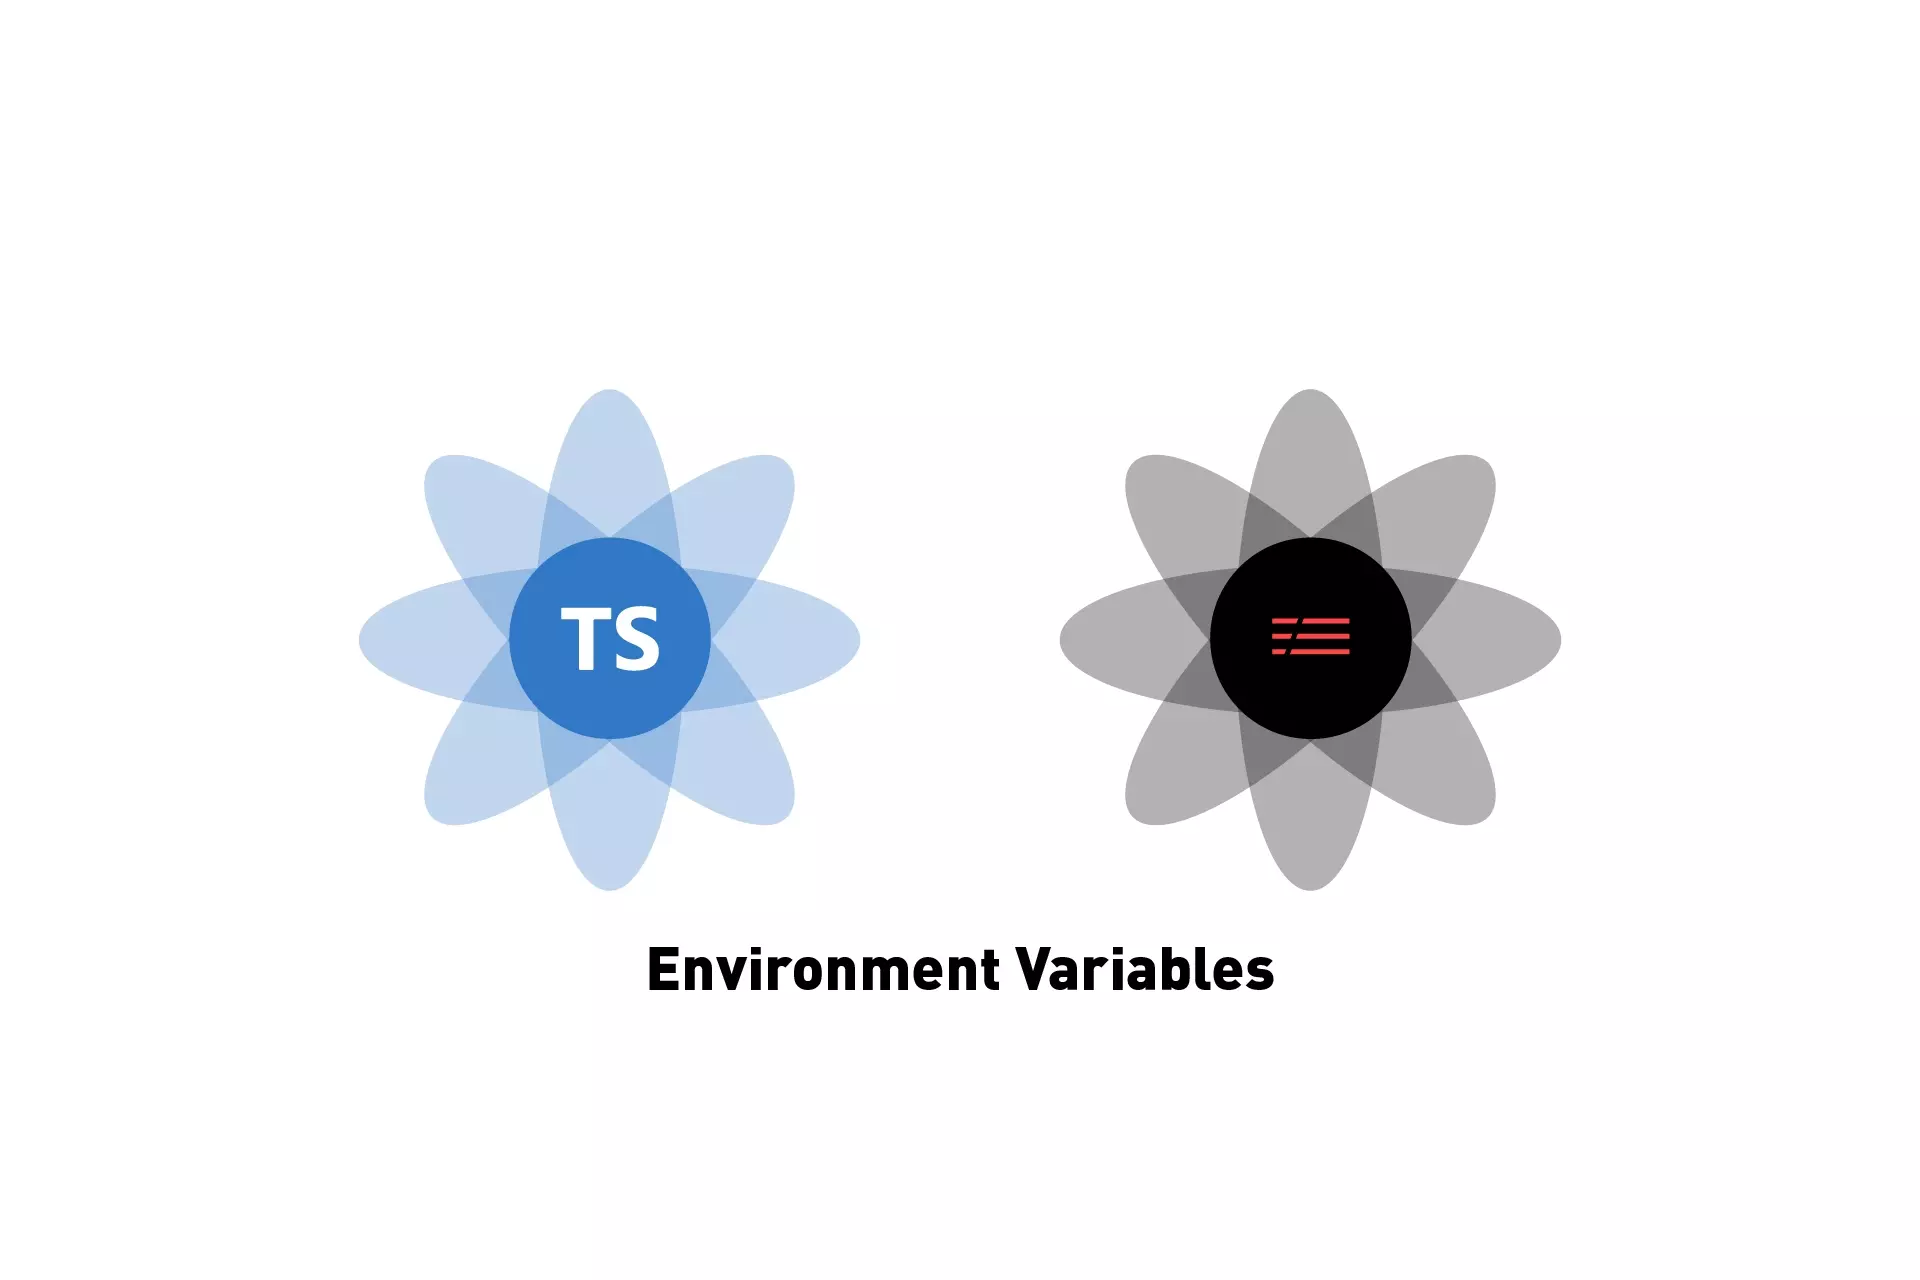 A flower that represents Typescript next to one that represents Serverless. Beneath it sits the text "Environment Variables".